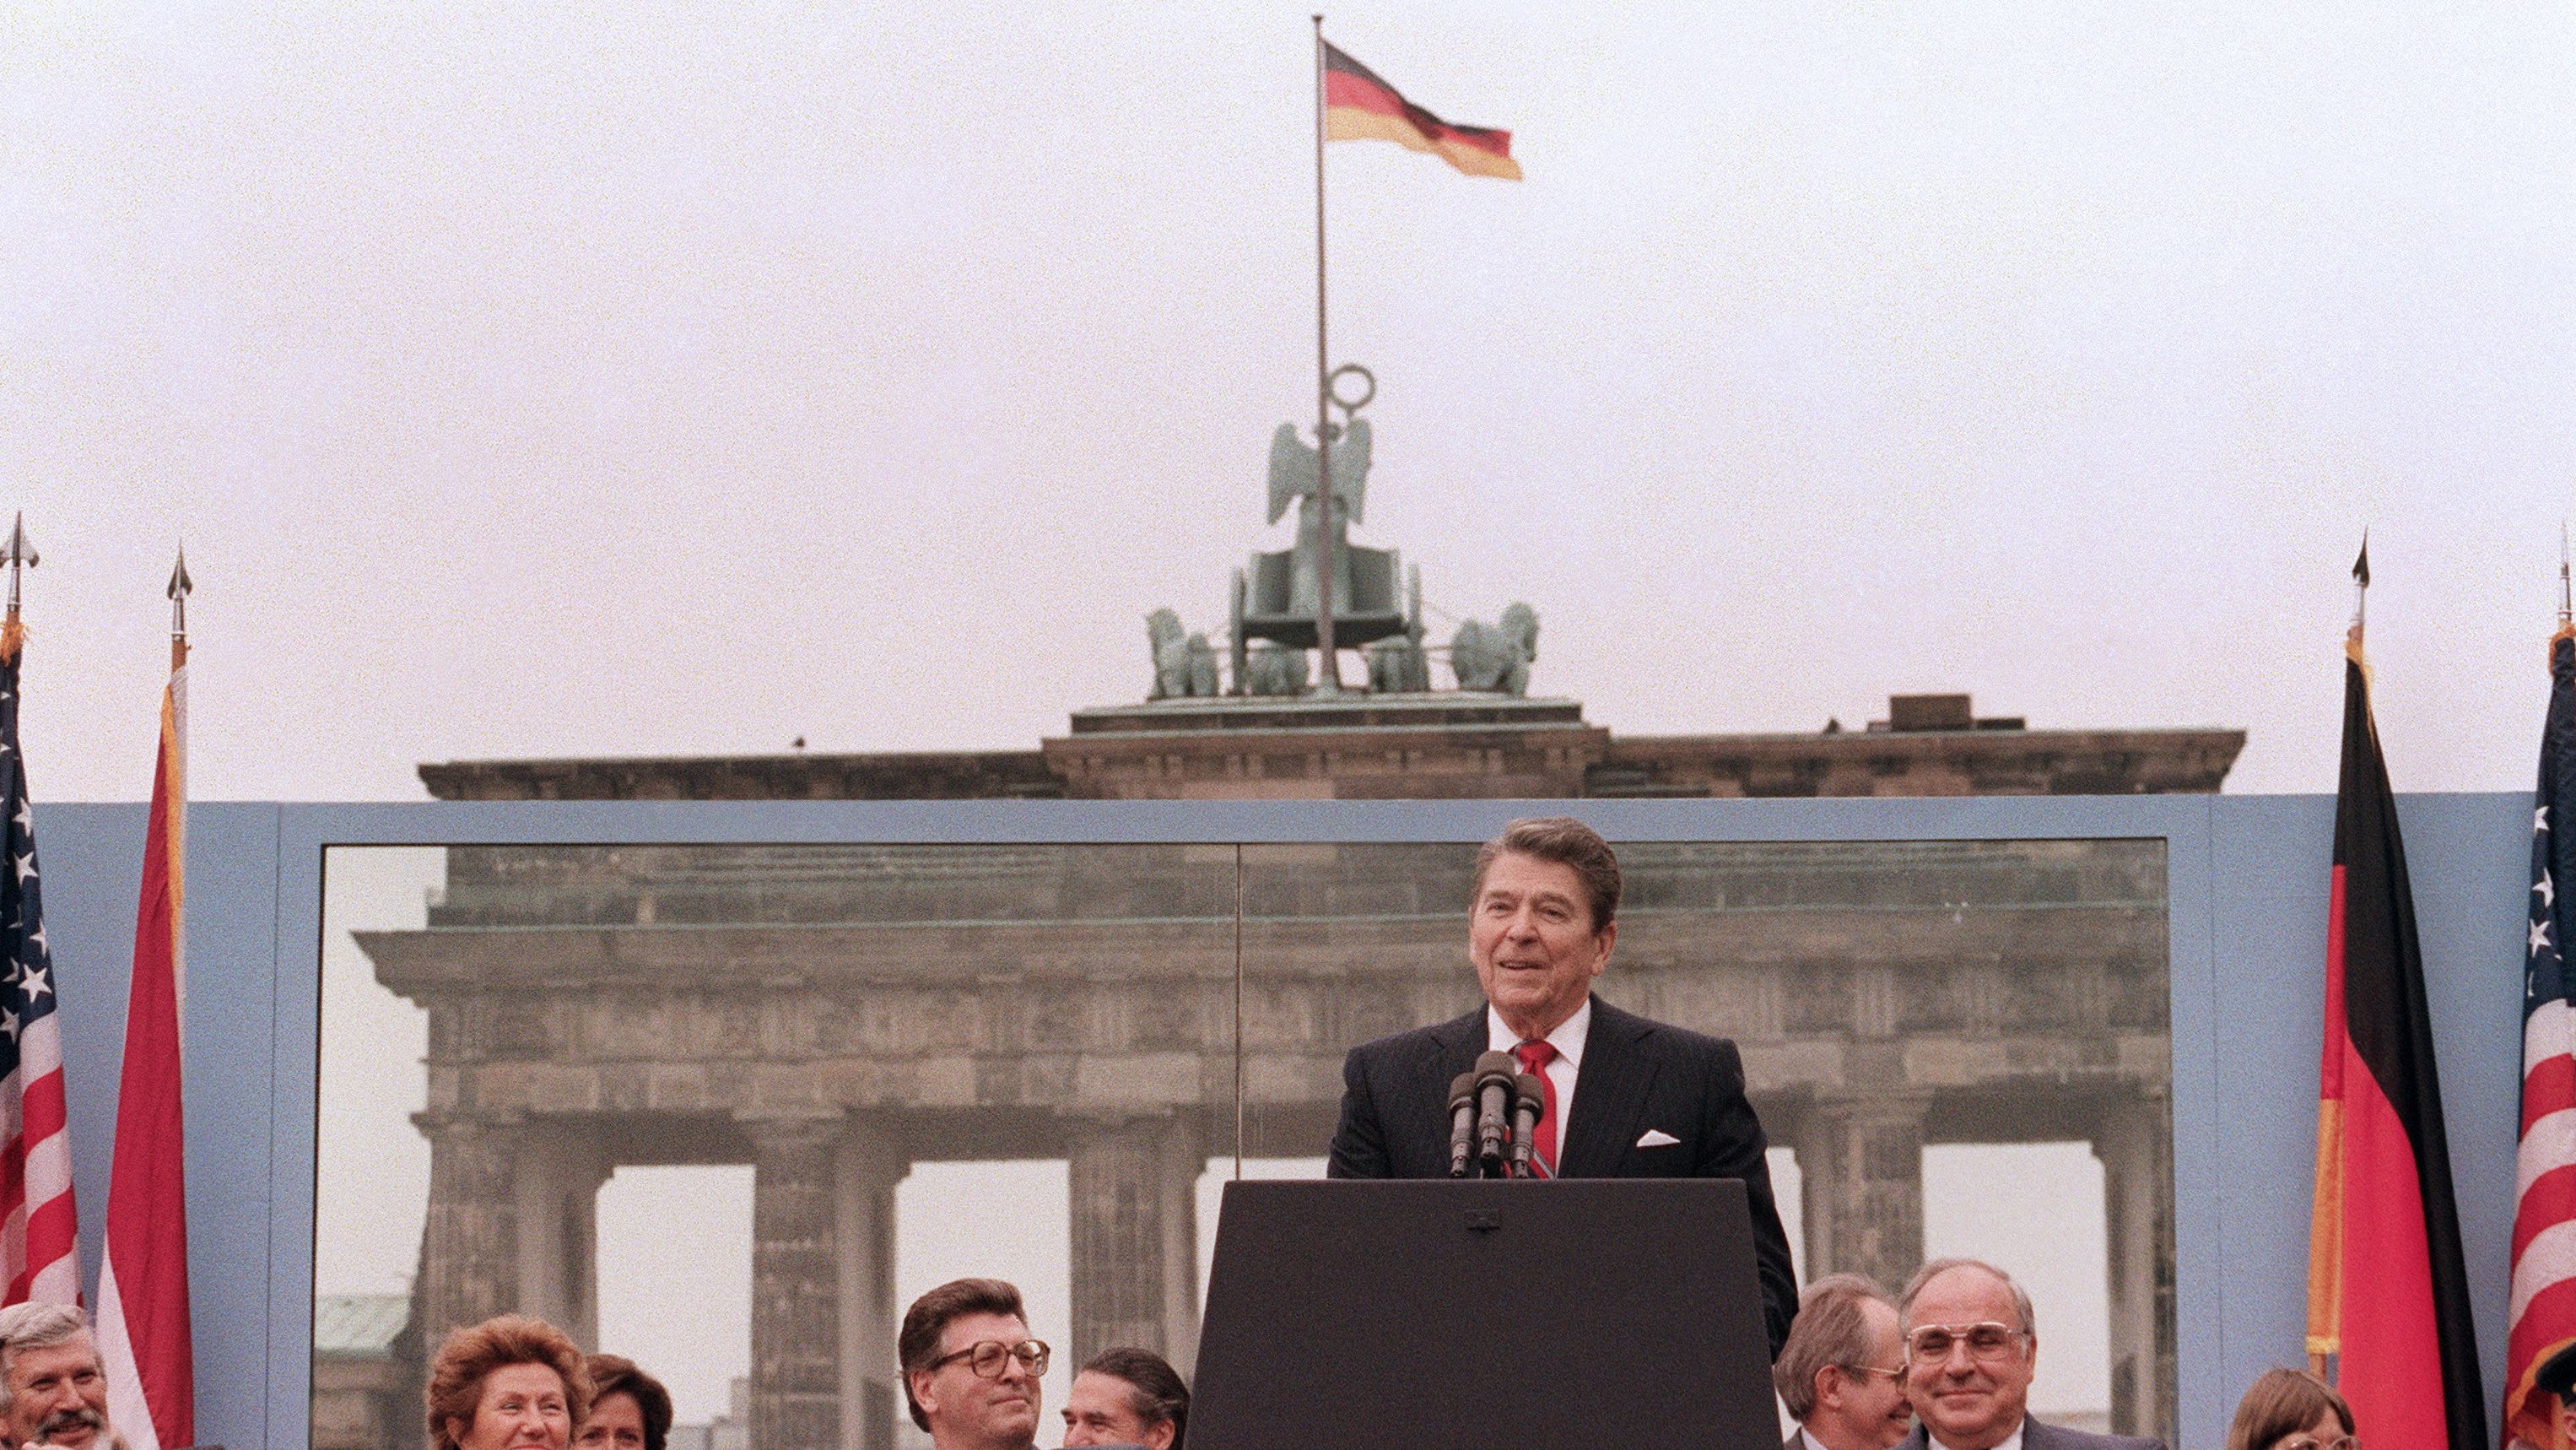 US President Reagan, commemorating the 750th anniversary of Berlin, addresses the people of West Berlin at the base of the Brandenburg Gate, near the Berlin Wall on June 12, 1987. Due to the amplification system being used, the President's words could also be heard on the Eastern (communist-controlled) side of the wall. "Tear down this wall!" was the famous appeal by Reagan, directed at Gorbachev, to destroy the Berlin Wall. The address Reagan delivered that day is considered by many to have affirmed the beginning of the end of the Cold War and the fall of the Soviet bloc. 